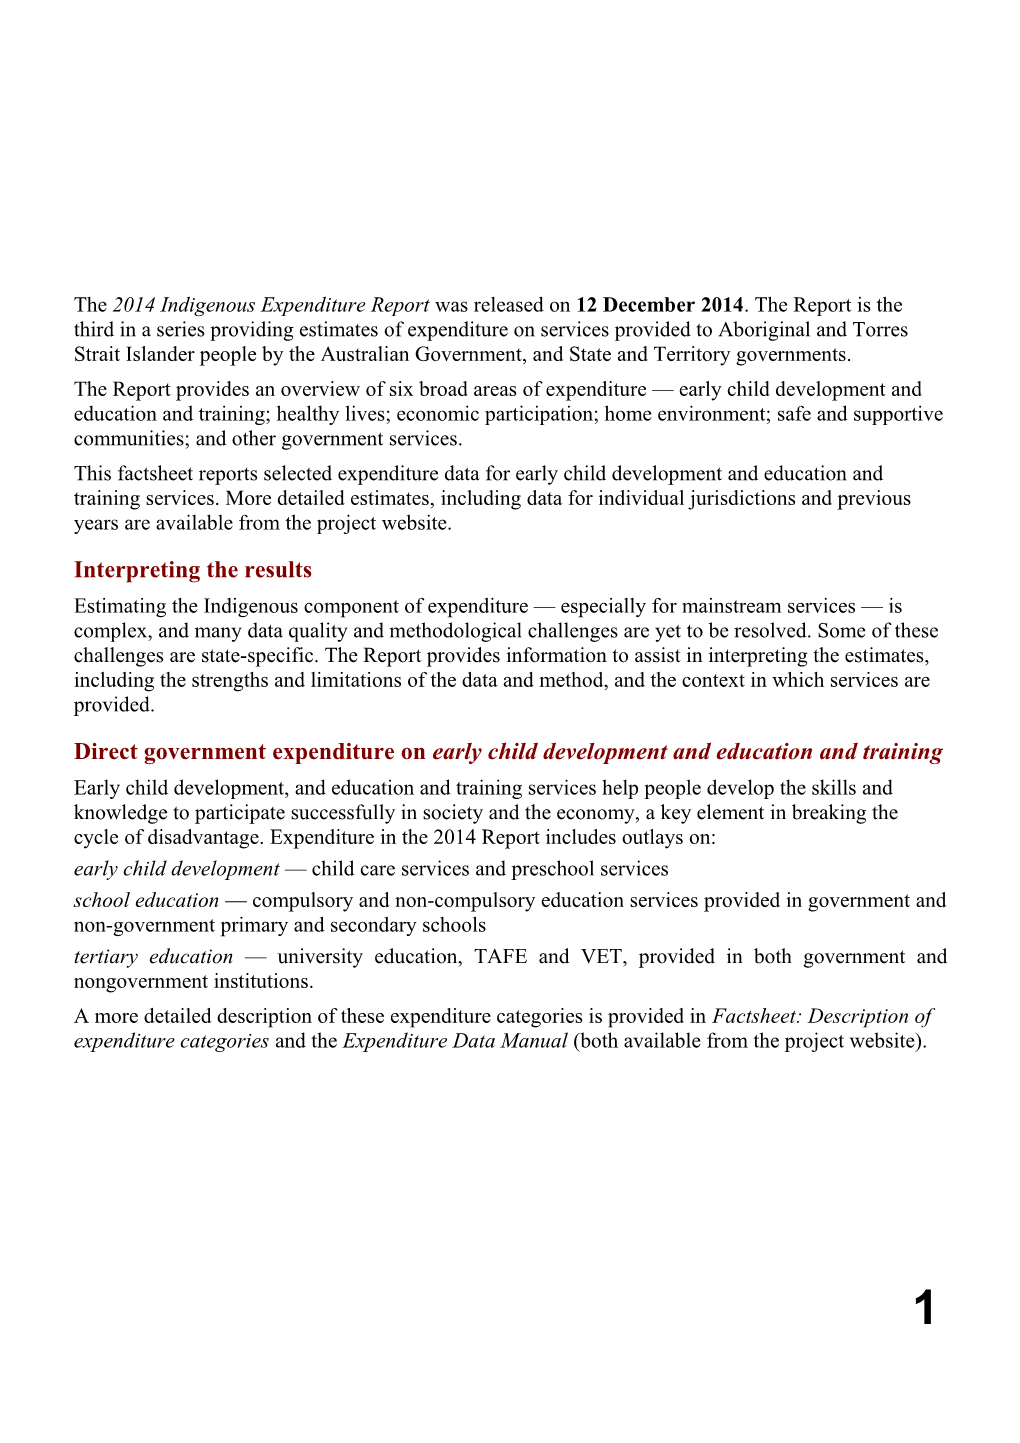 Early Child Development and Education and Training - IER 2014